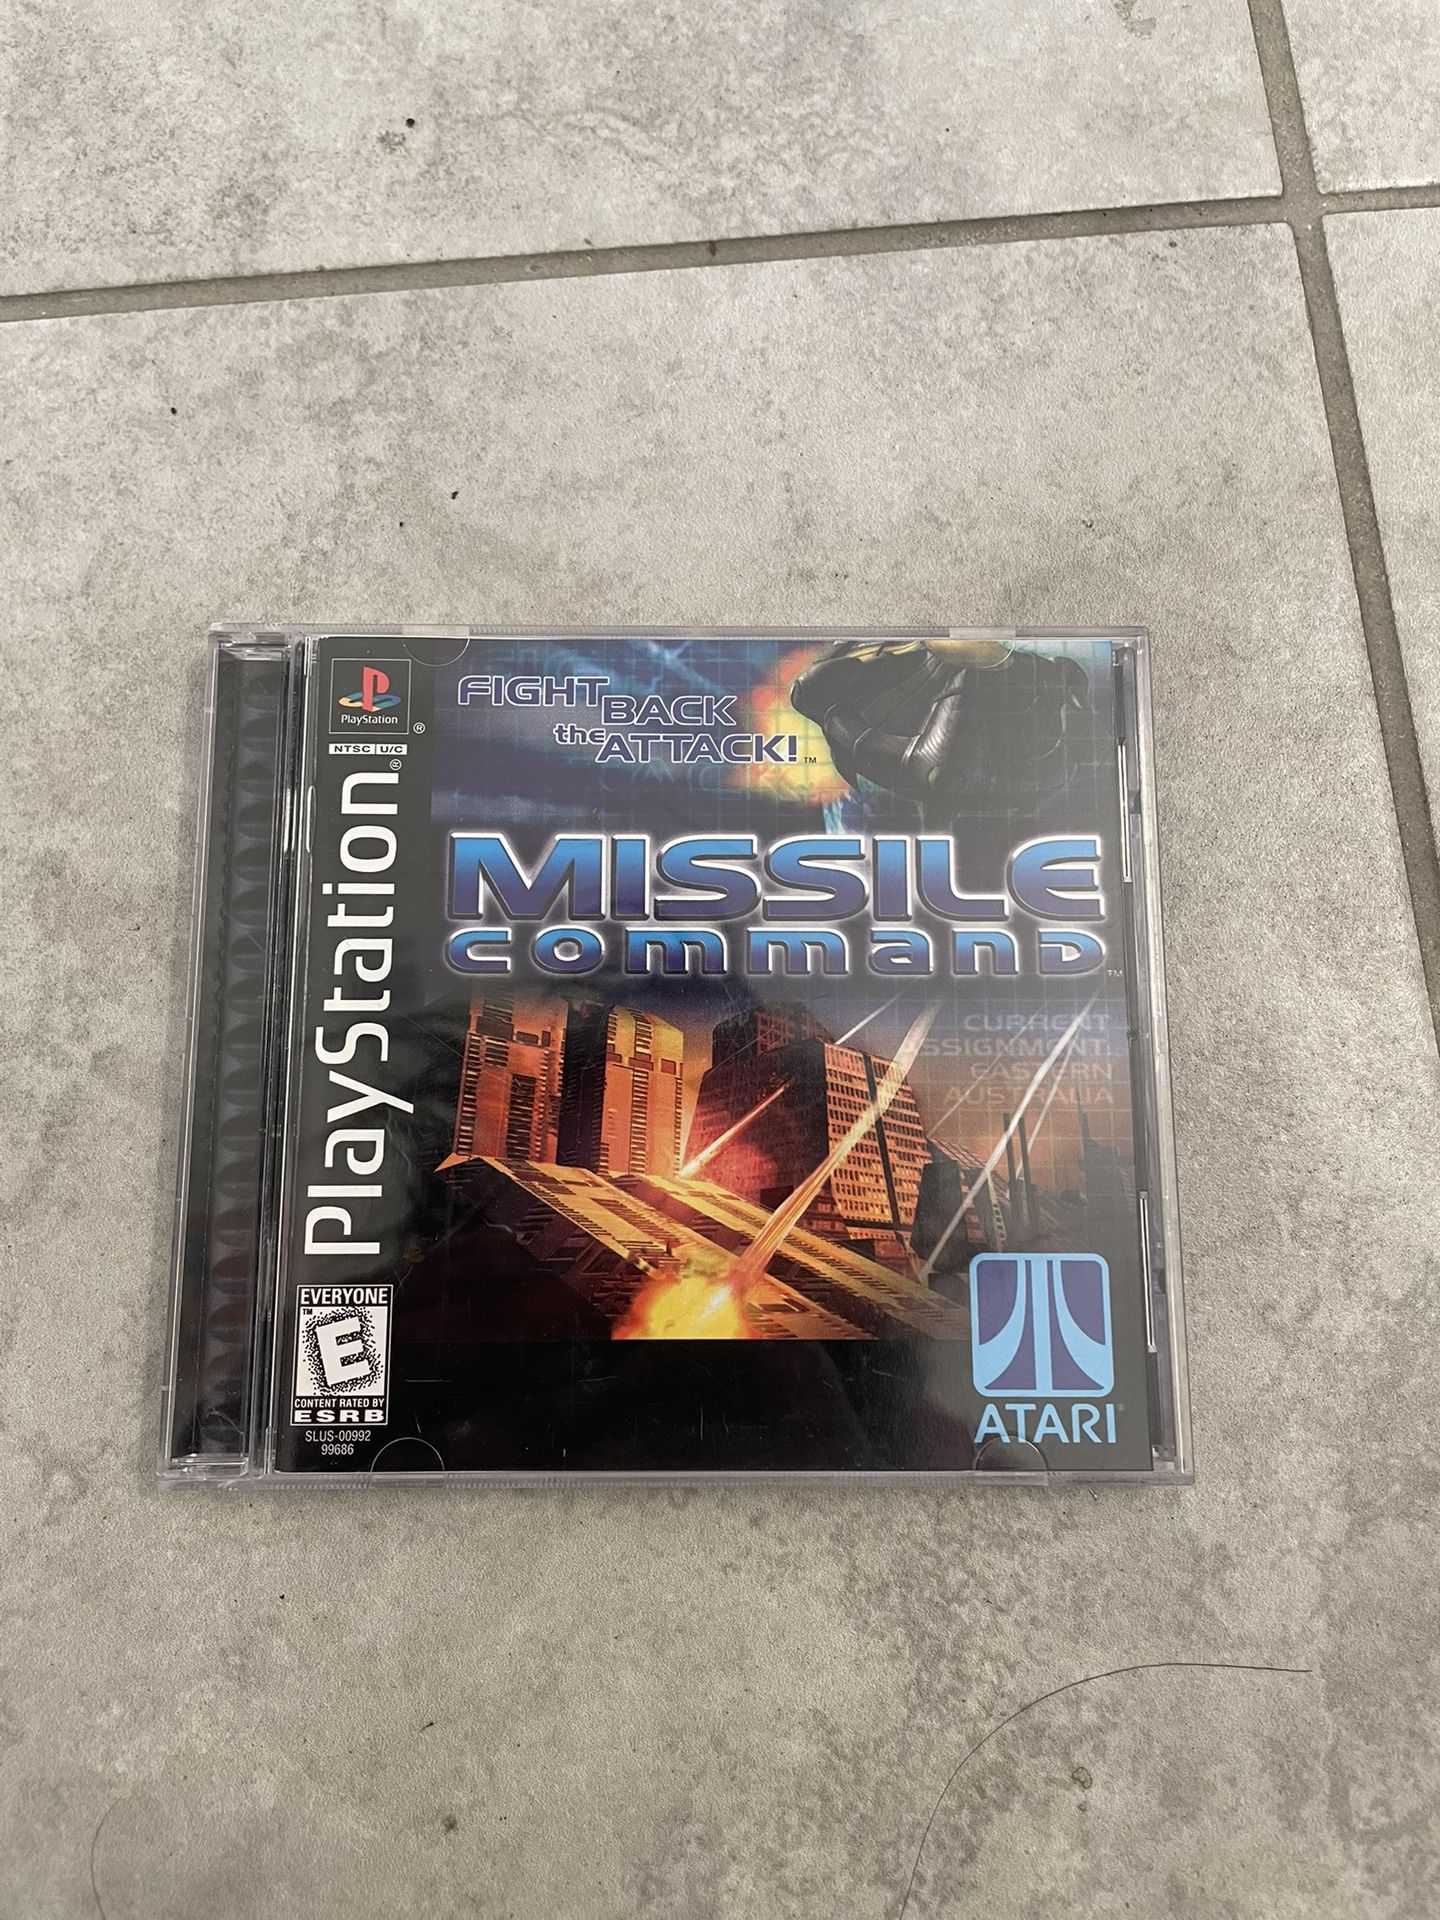 99’ PS1 “Missle Command” Game